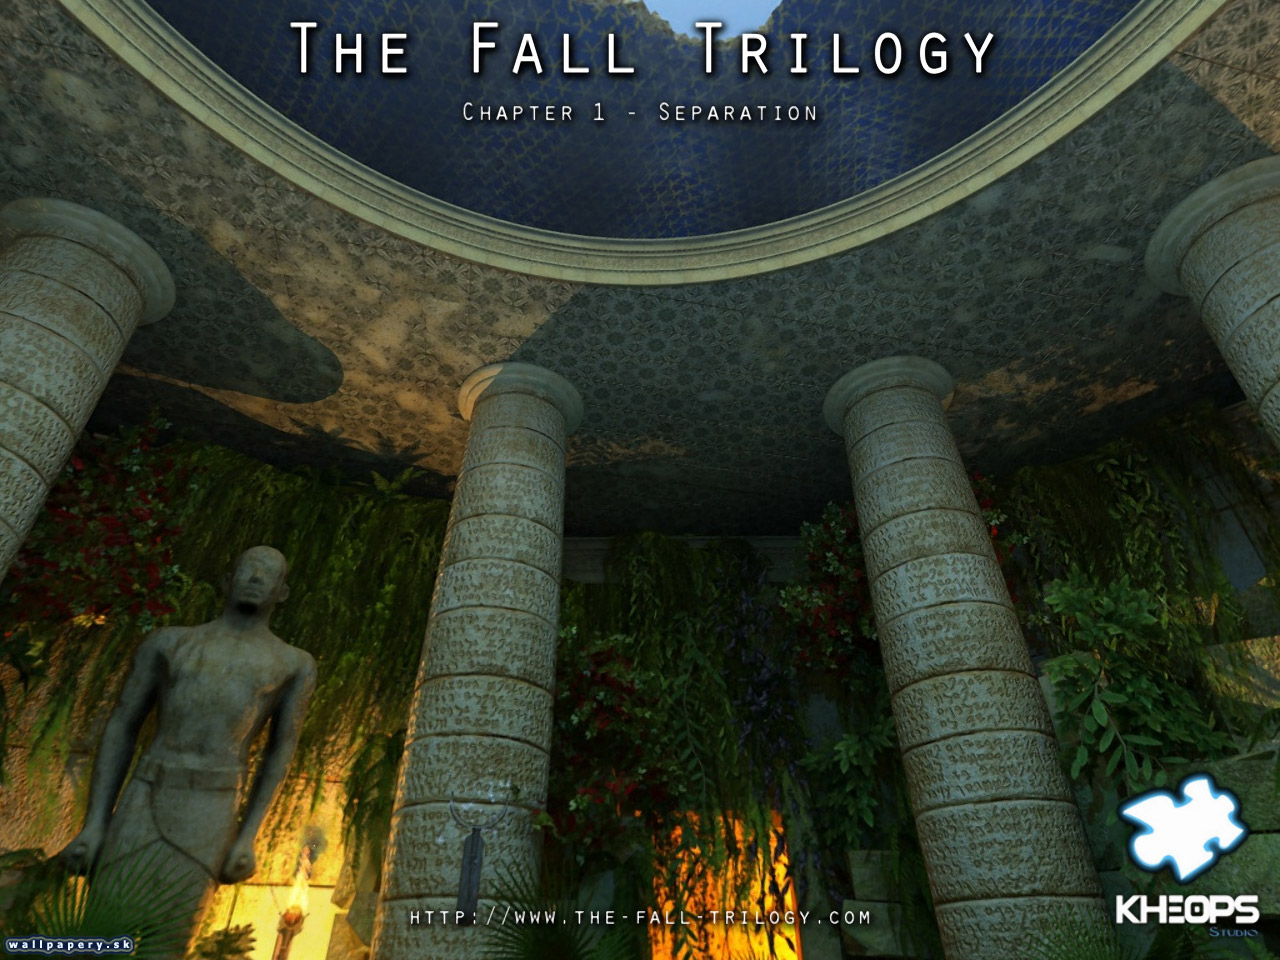 The Fall Trilogy - Chapter 1: Separation - wallpaper 7